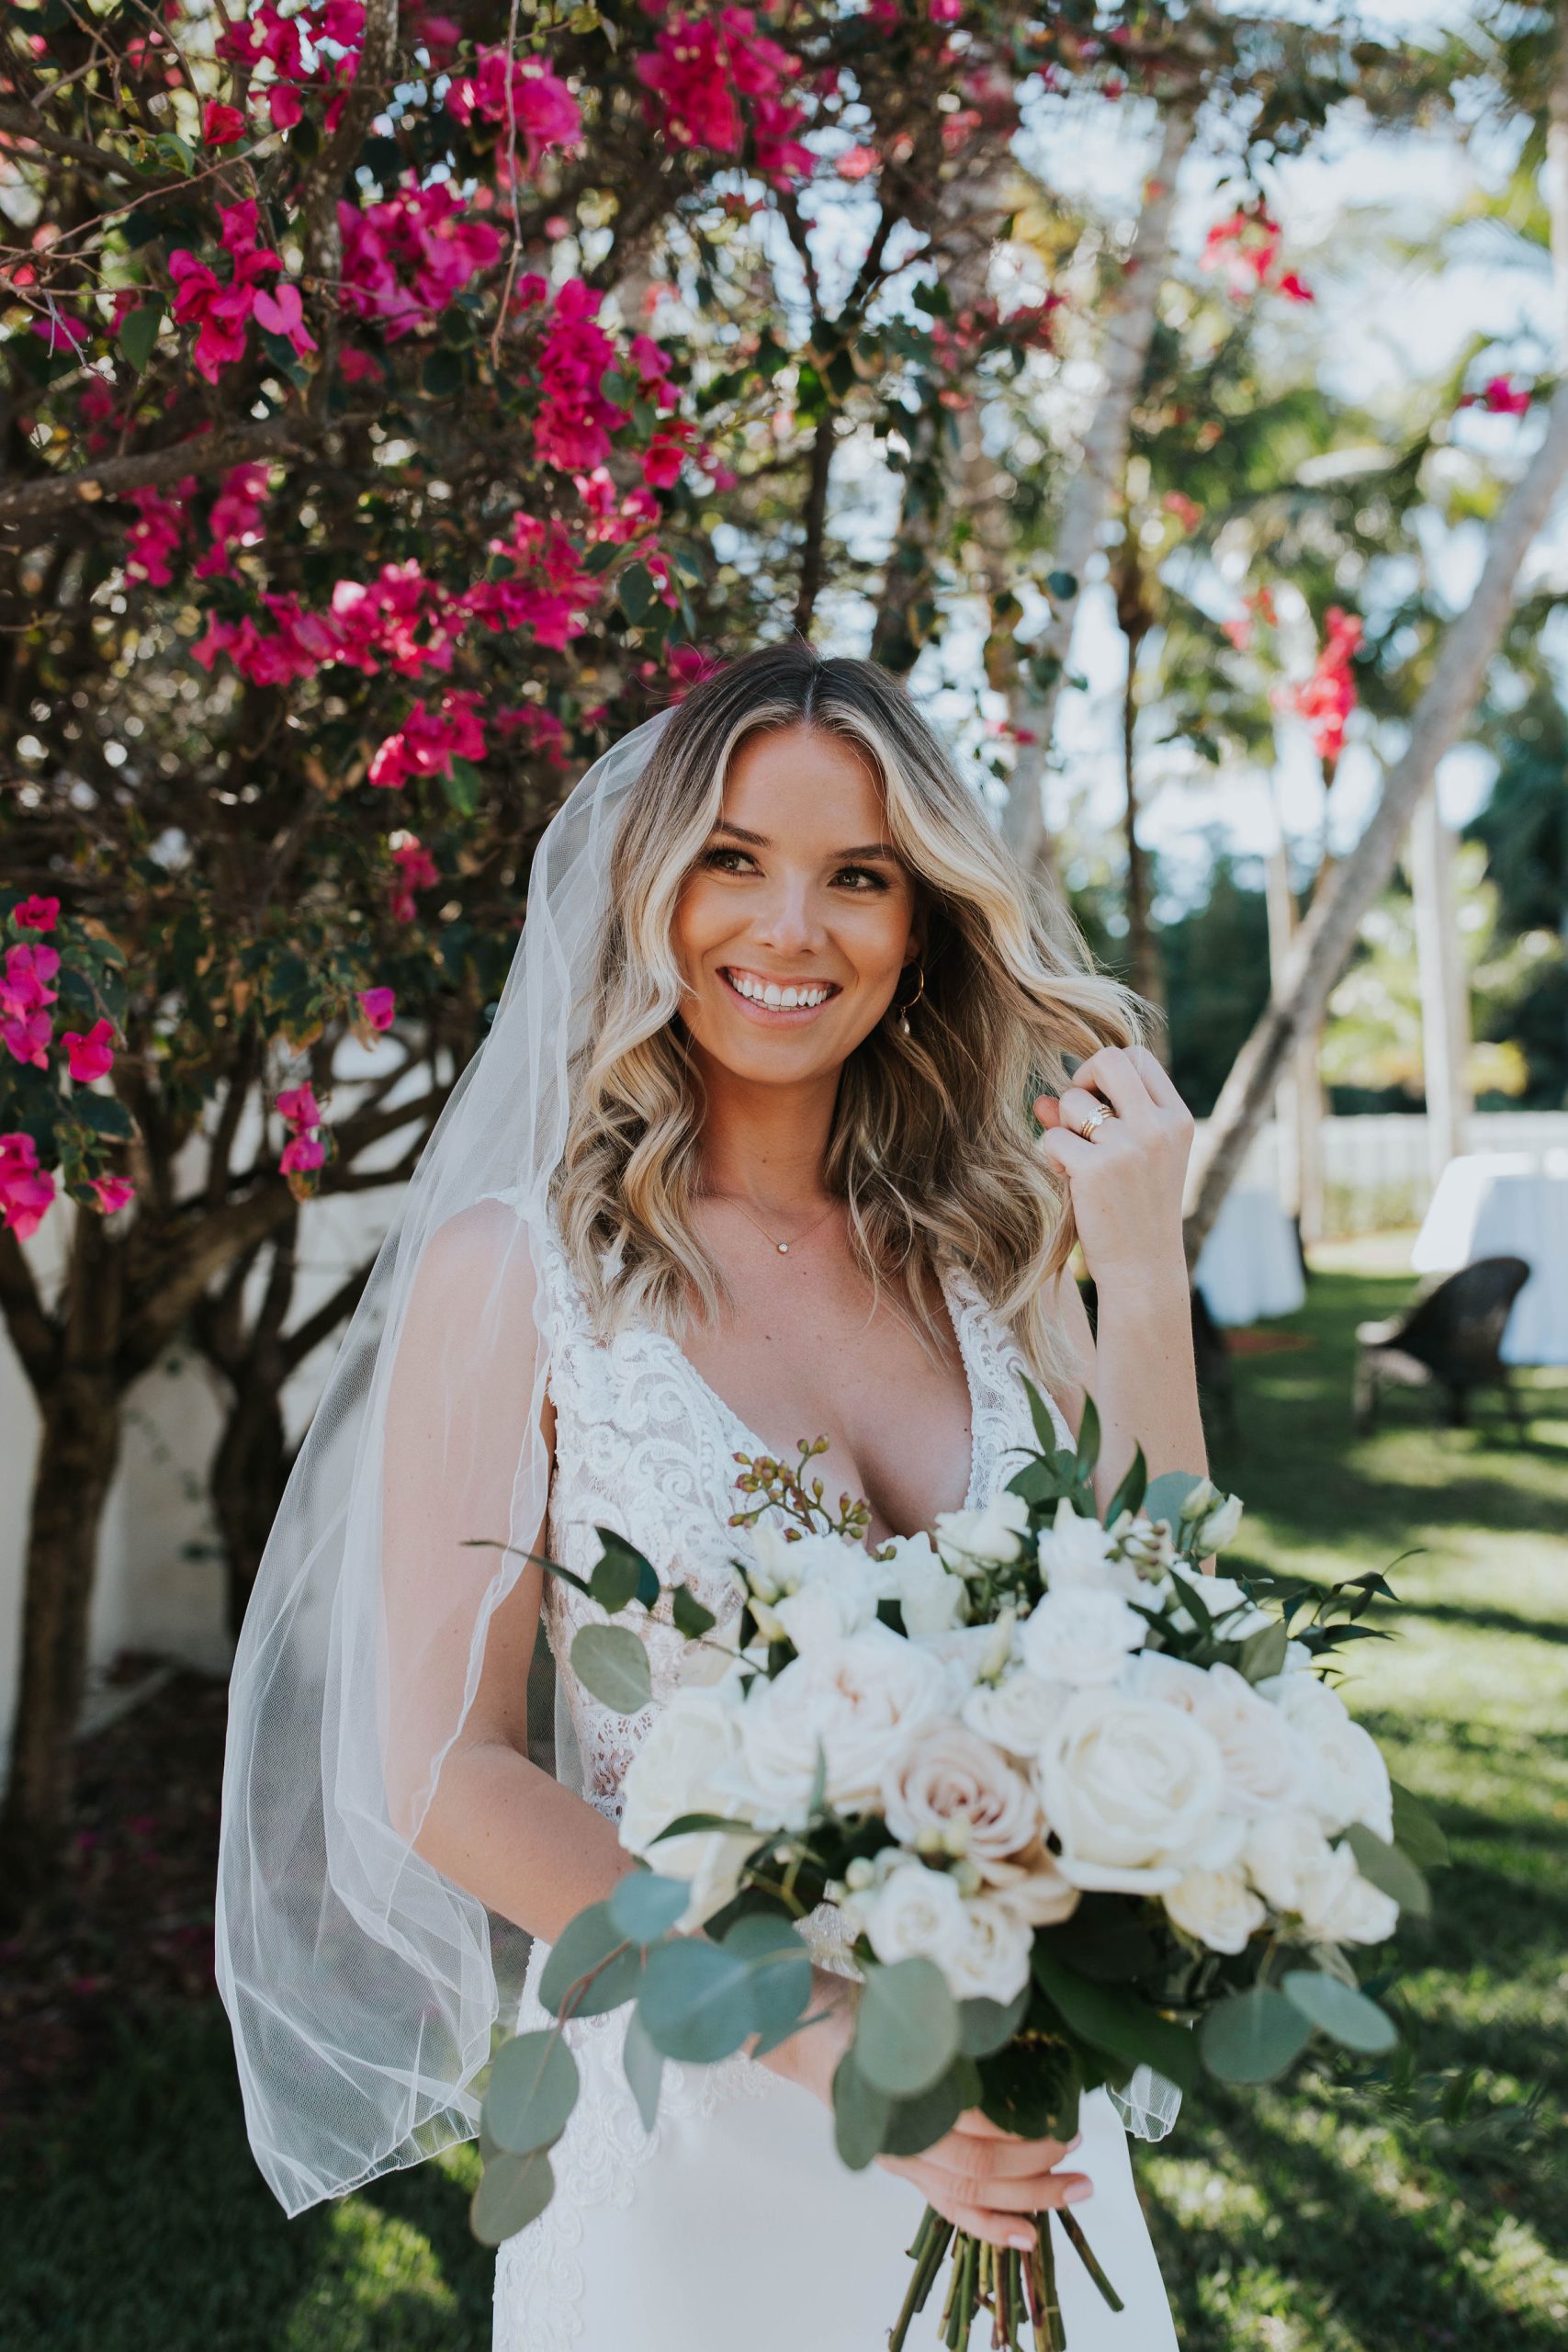 Bride With A Natural Wedding Makeup Look Wearing A Wedding Gown Called Aidan By Maggie Sottero With A Bouquet Of White Roses